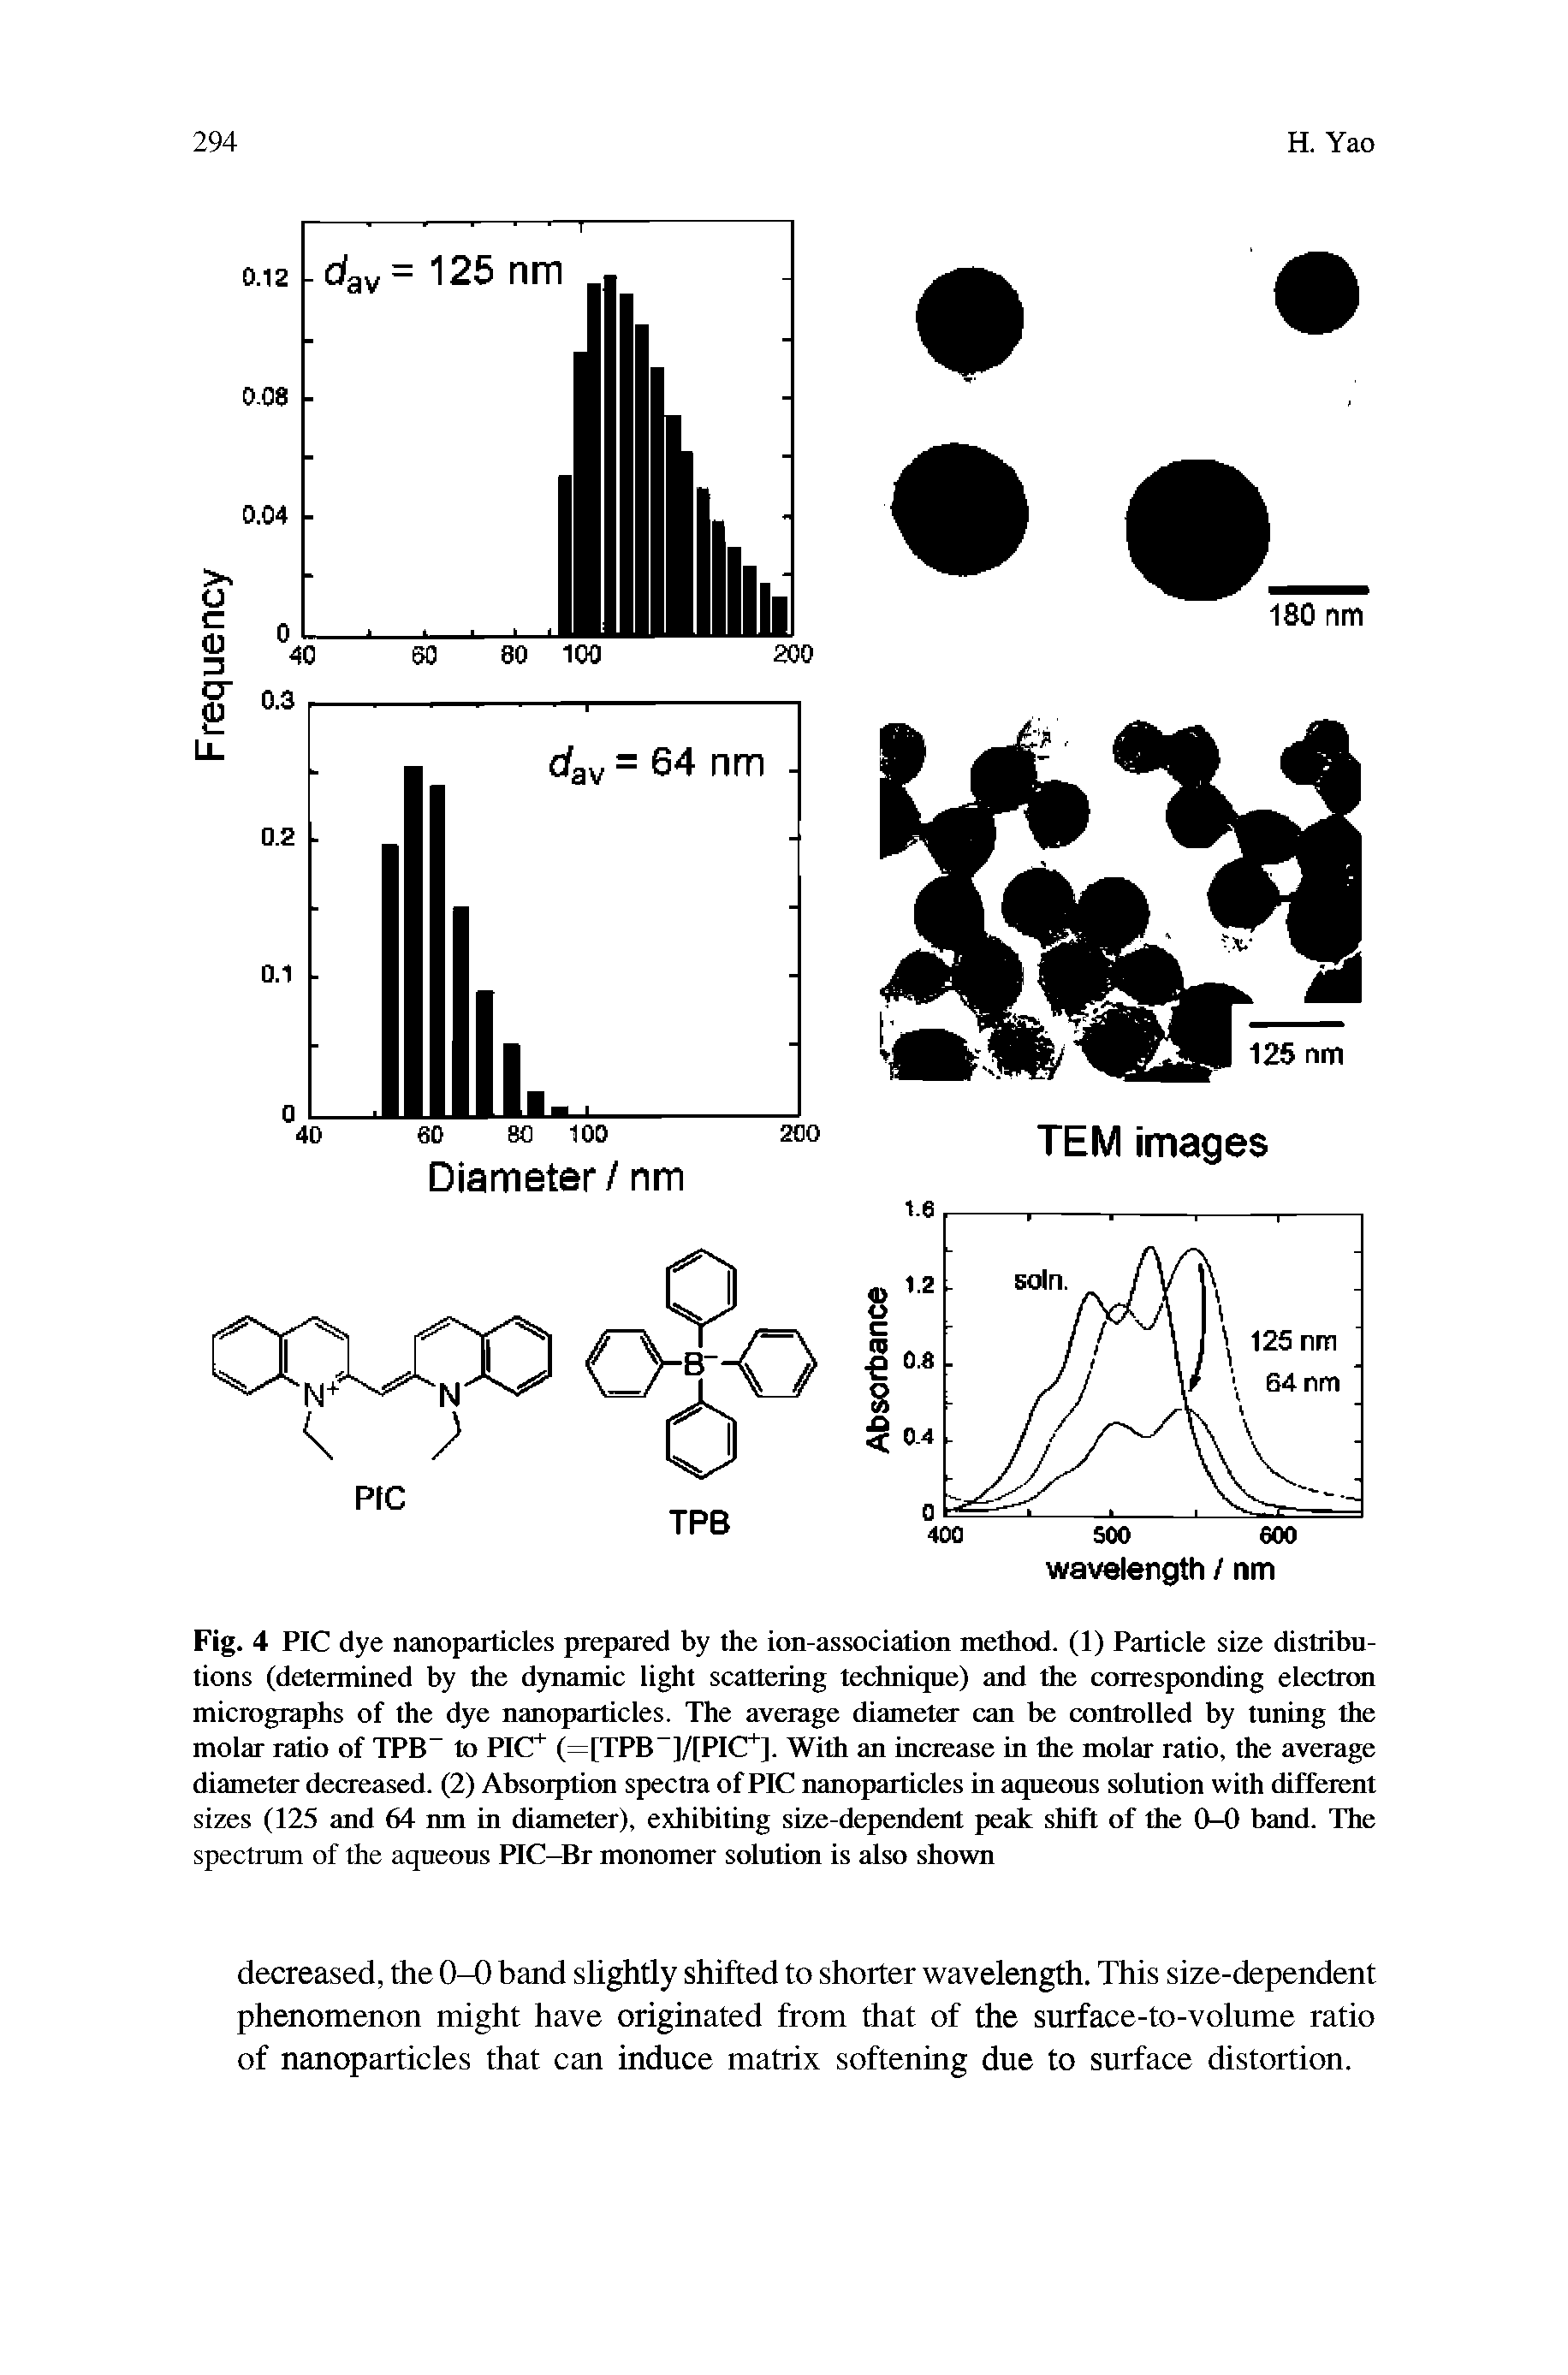 Fig. 4 PIC dye nanoparticles prepared by the ion-association method. (1) Particle size distributions (determined by the dynamic light scattering technique) and the corresponding electron micrographs of the dye nanoparticles. The average diameter can be controlled by tuning the molar ratio of TPB- to PIC+ (=[TPB-]/[PIC+]. With an increase in the molar ratio, the average diameter decreased. (2) Absorption spectra of PIC nanoparticles in aqueous solution with different sizes (125 and 64 nm in diameter), exhibiting size-dependent peak shift of the 0-0 band. The spectrum of the aqueous PIC-Br monomer solution is also shown...